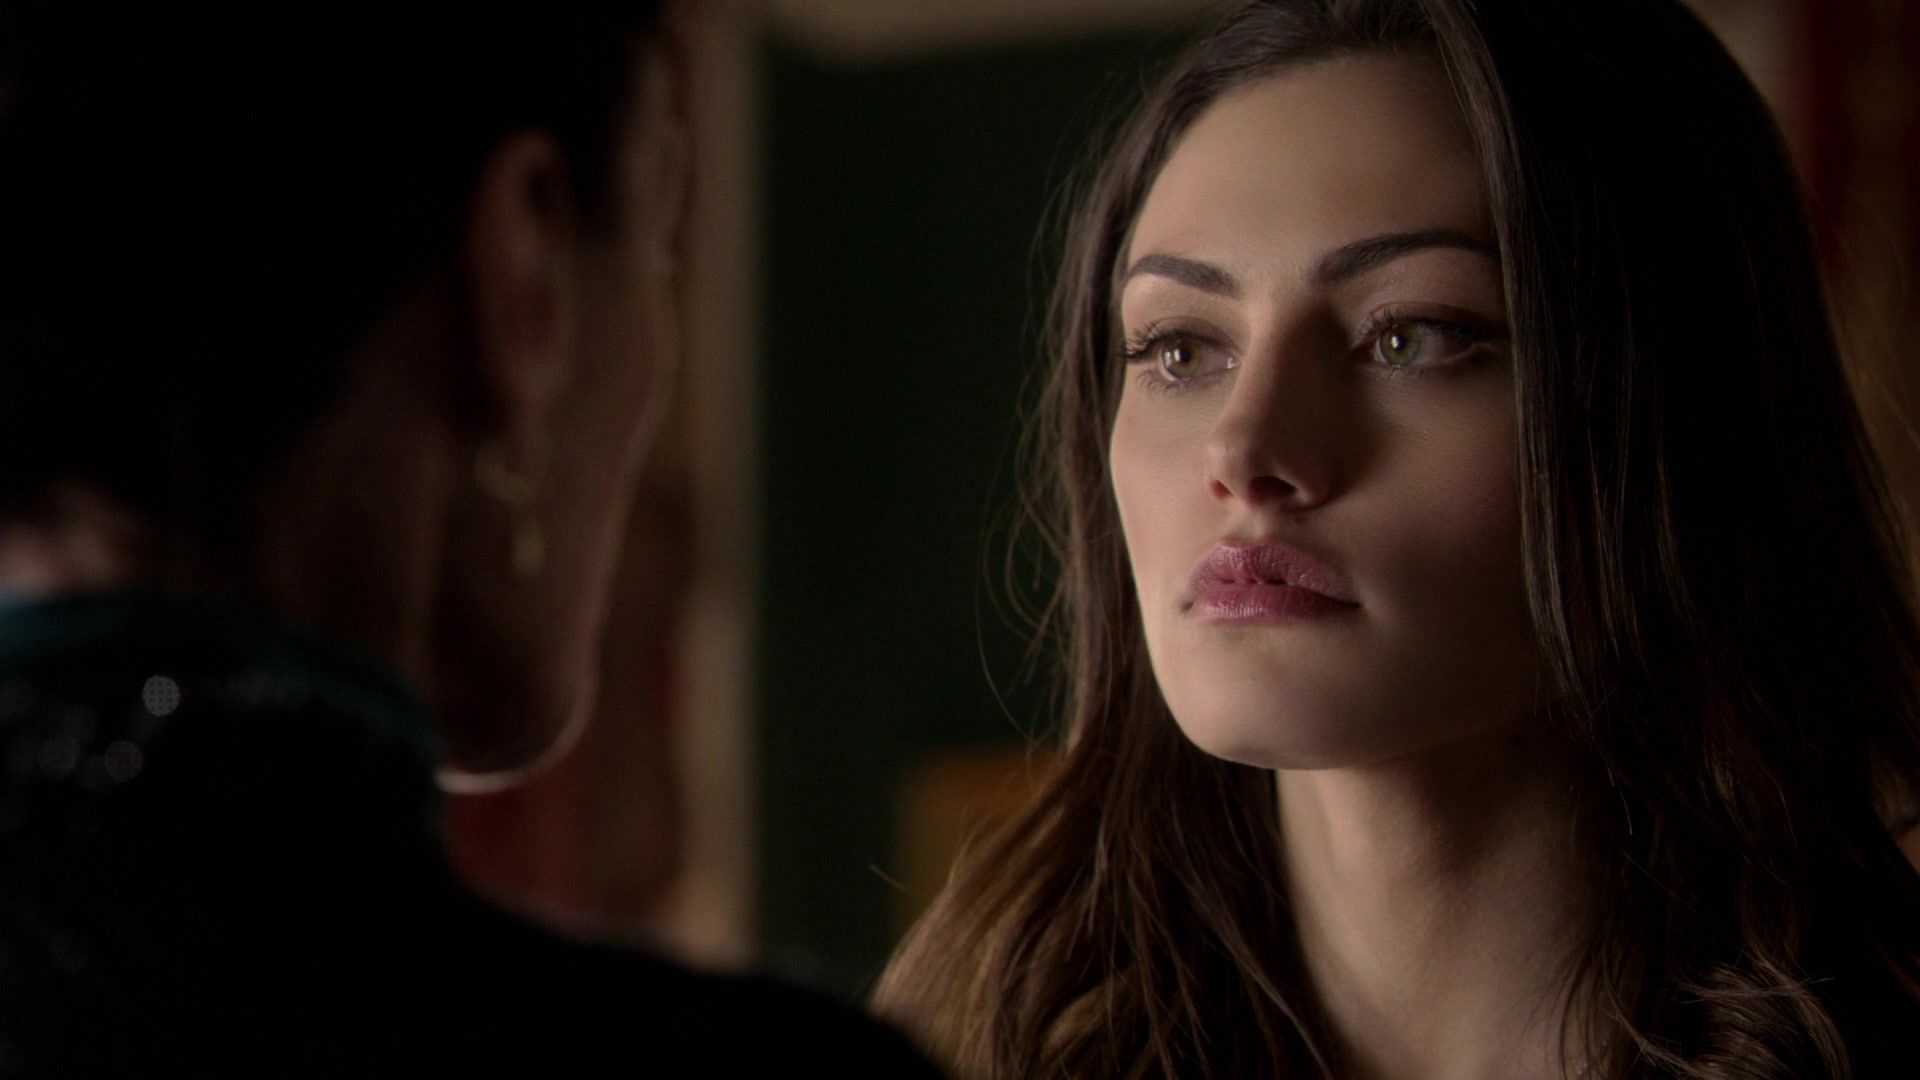 Phoebe Tonkin Web is an unofficial, non-profit fansite run by fans and is i...